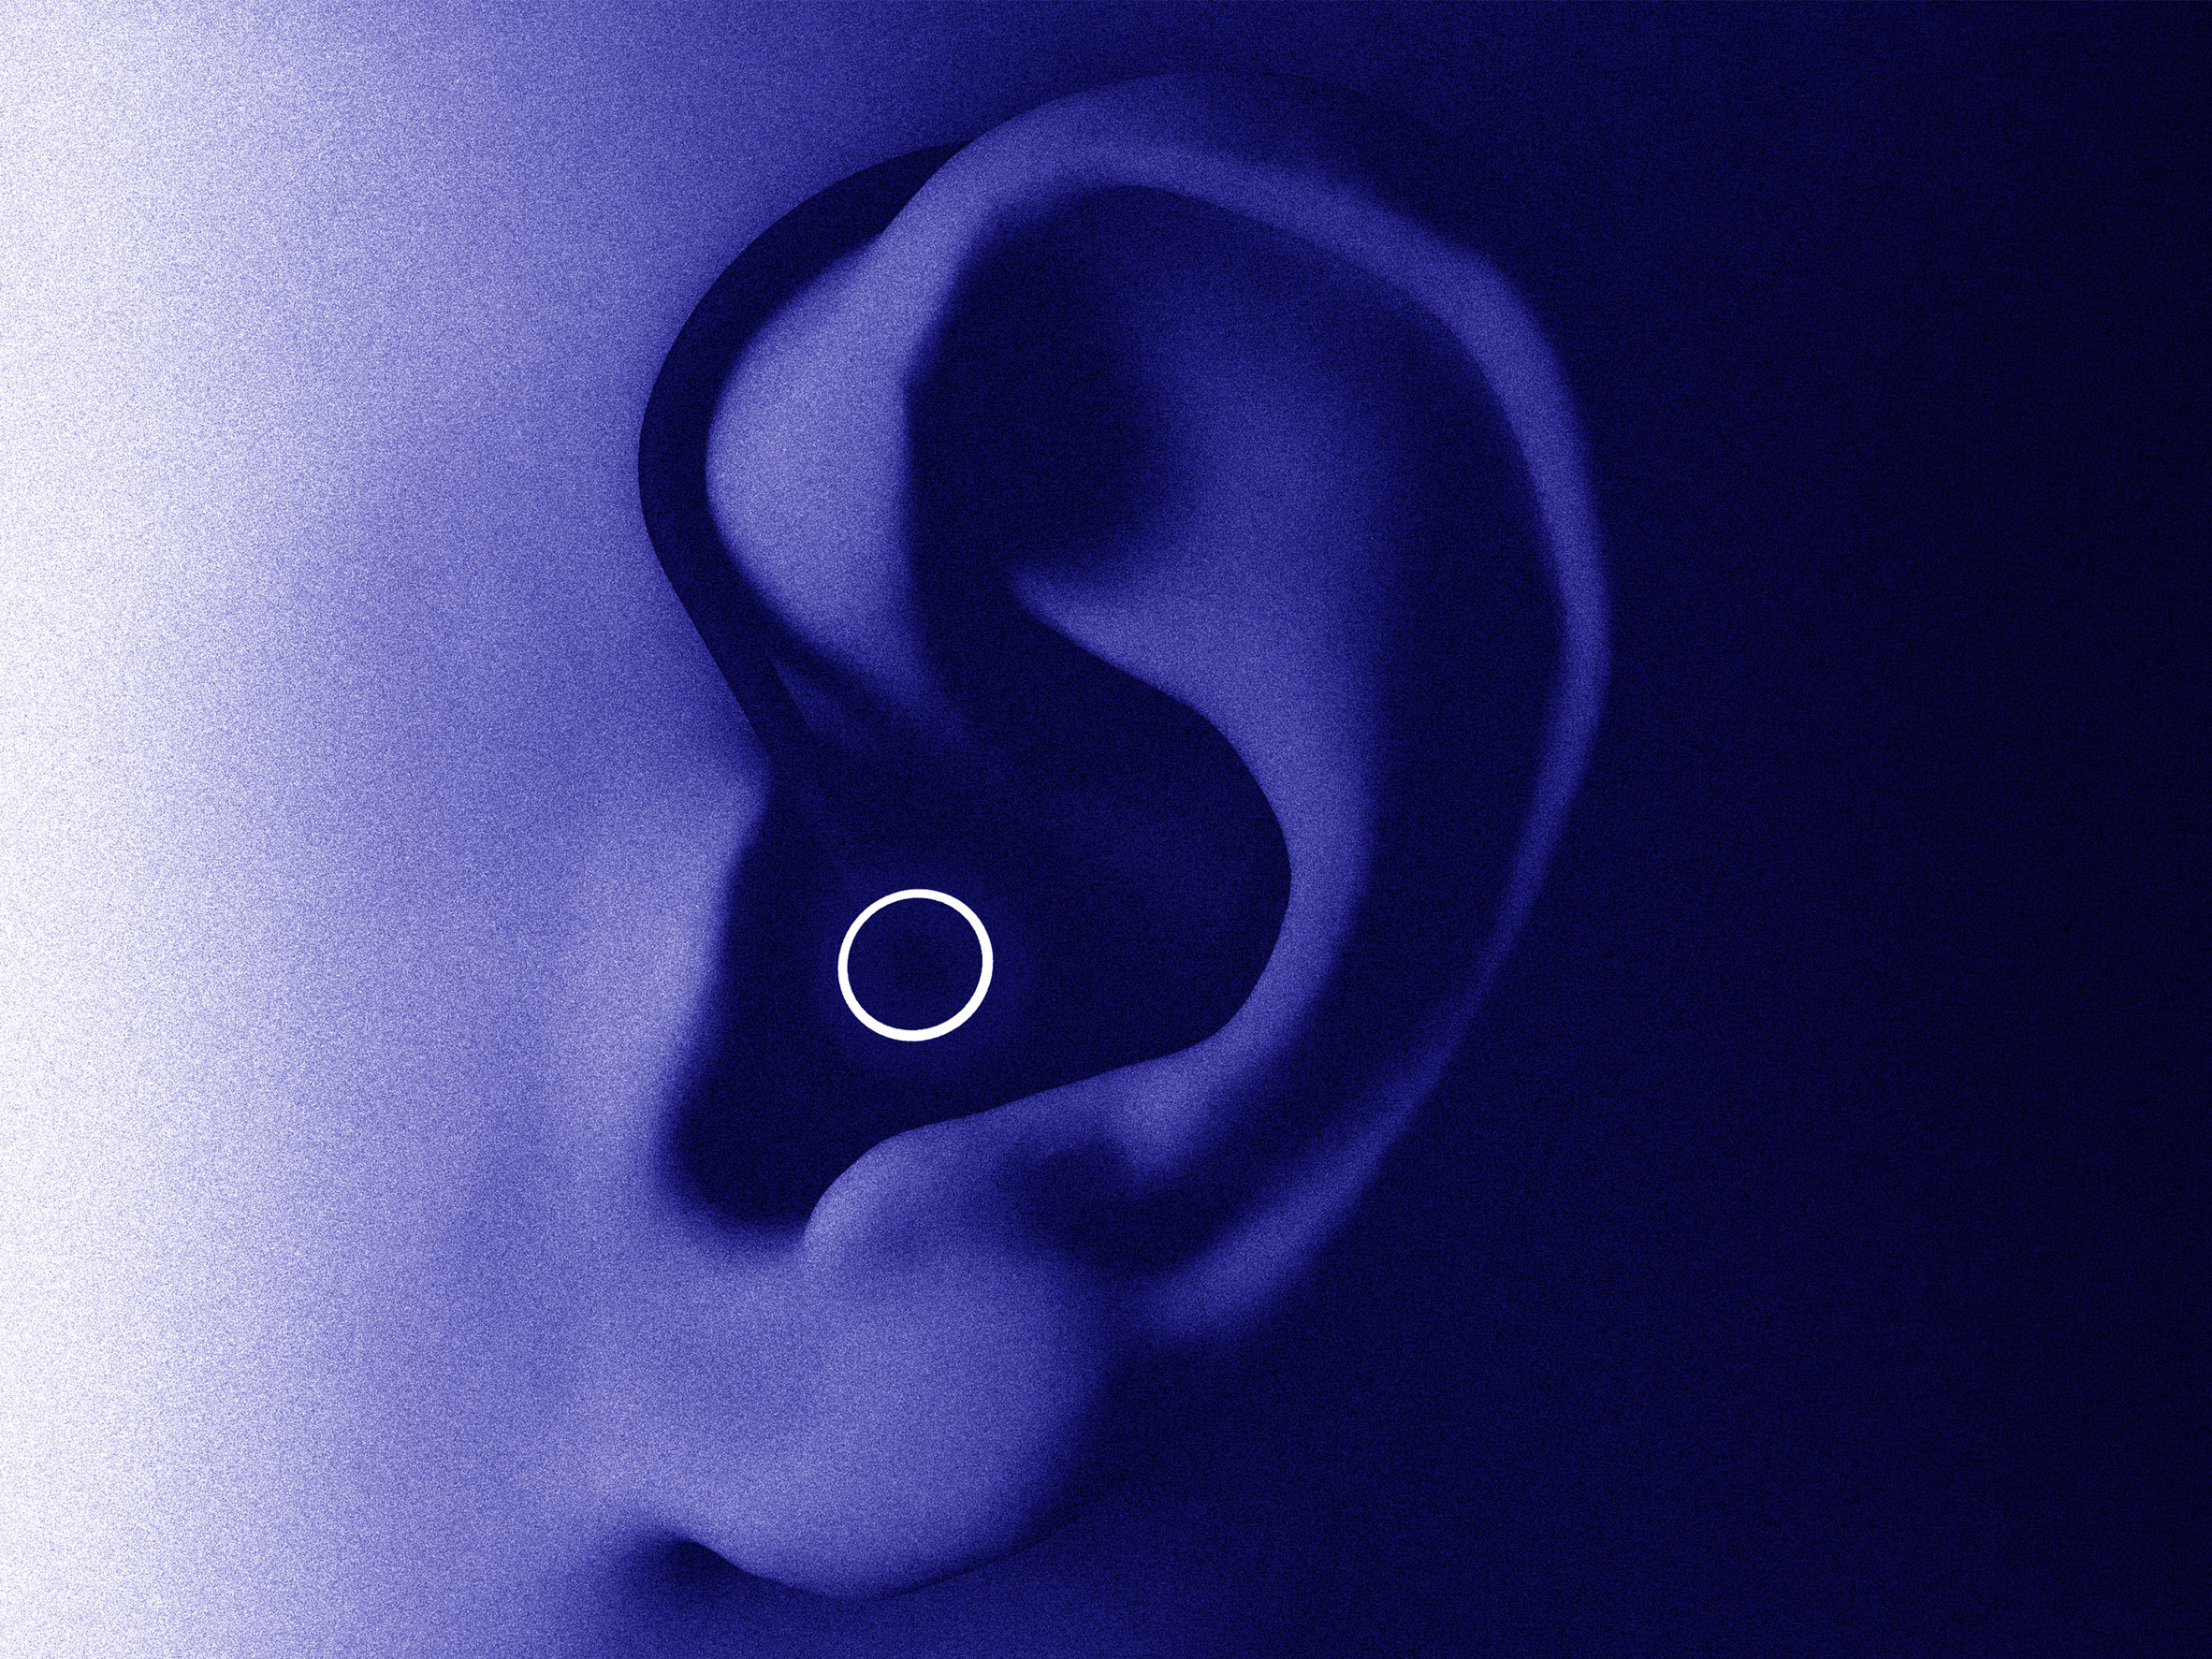 A graphic illustration of a device that is placed in the ear to help sleep disorders